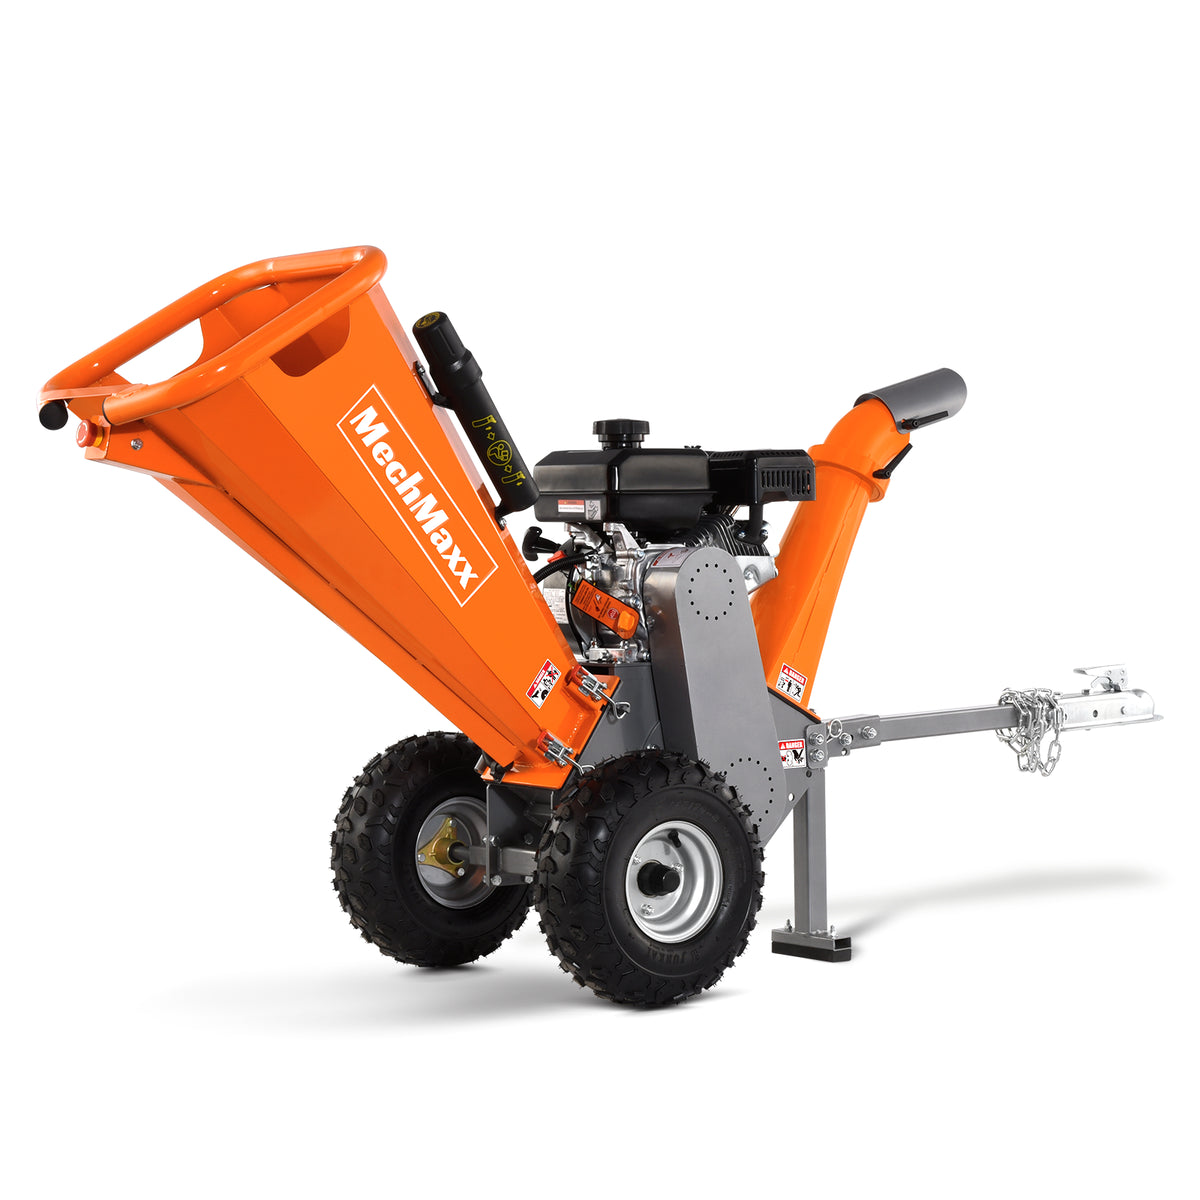 4 inch Rato 212cc 7hp Gas Engine Powered Wood Chipper with Towbar